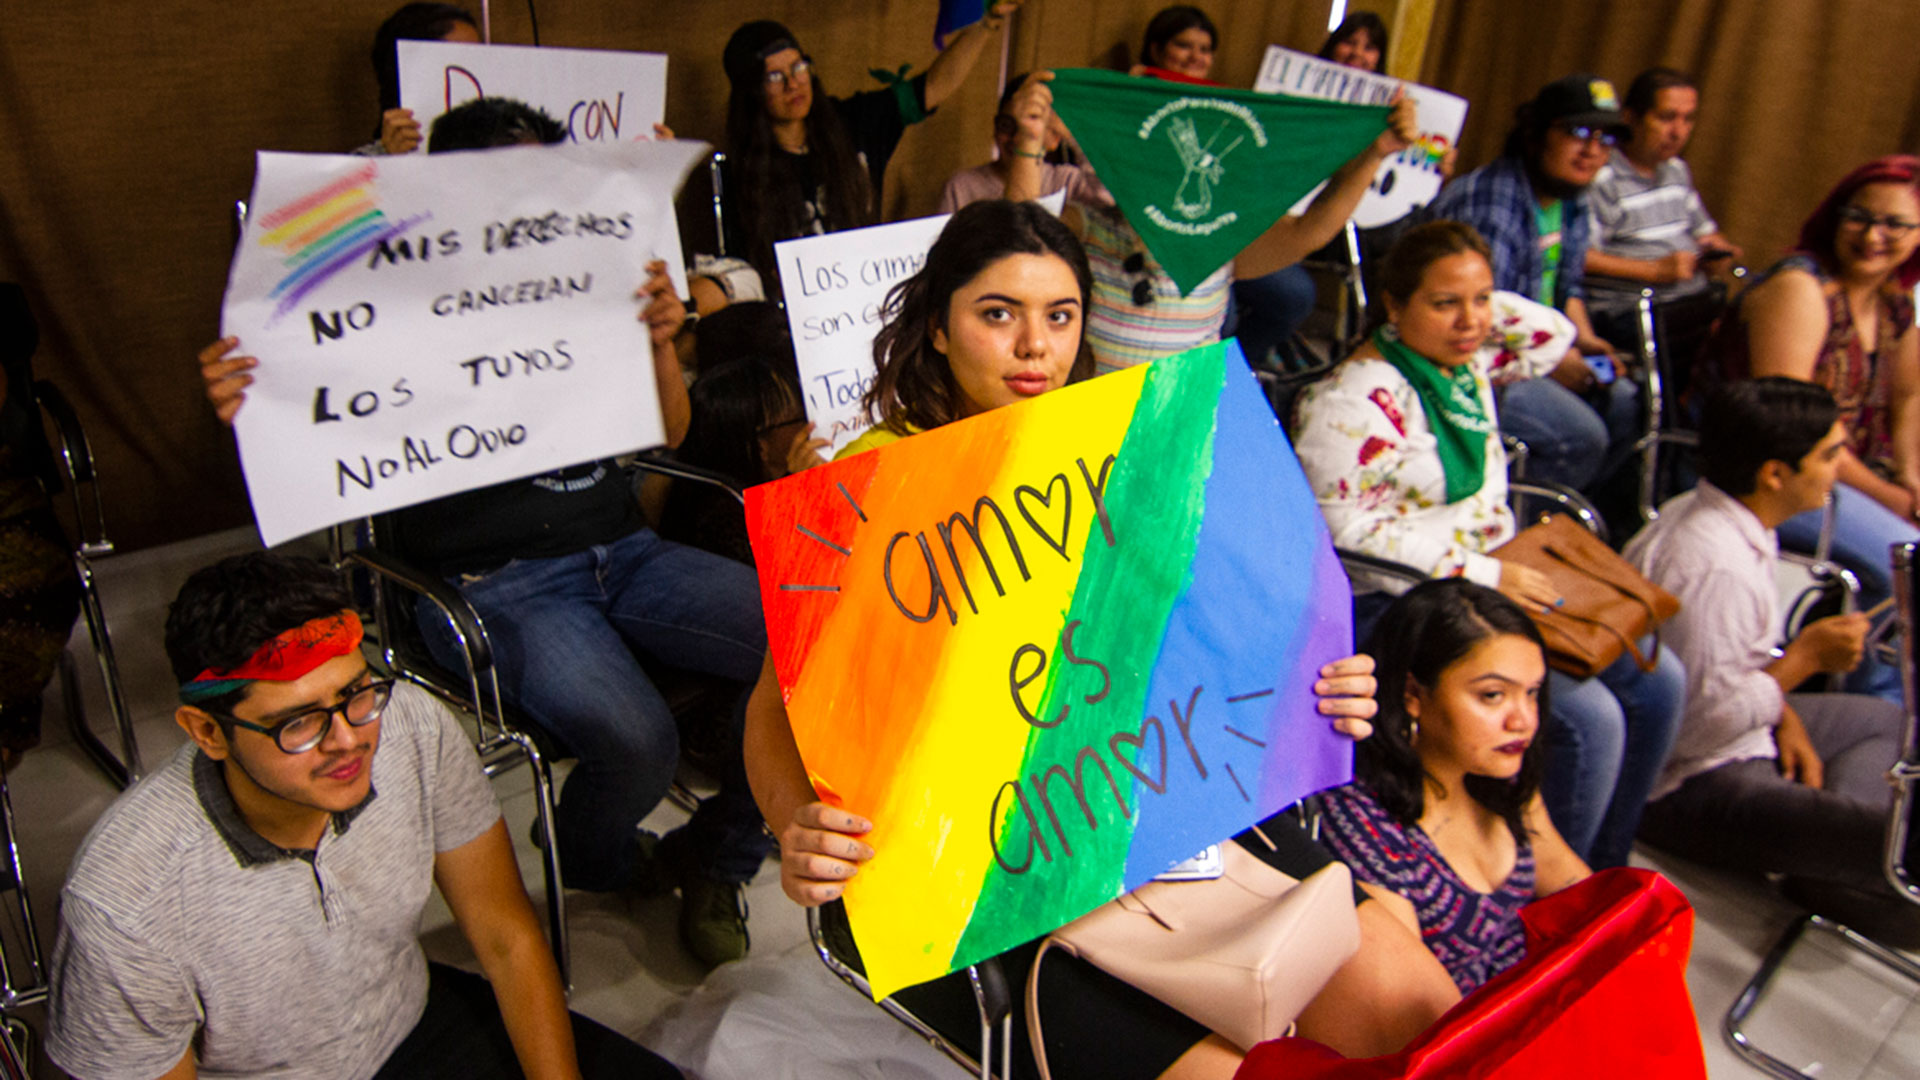 Dozens of supporters of the reform measure showed up to the hearing where it was introduced in 2019. The sign in the center reads, "Love is love."